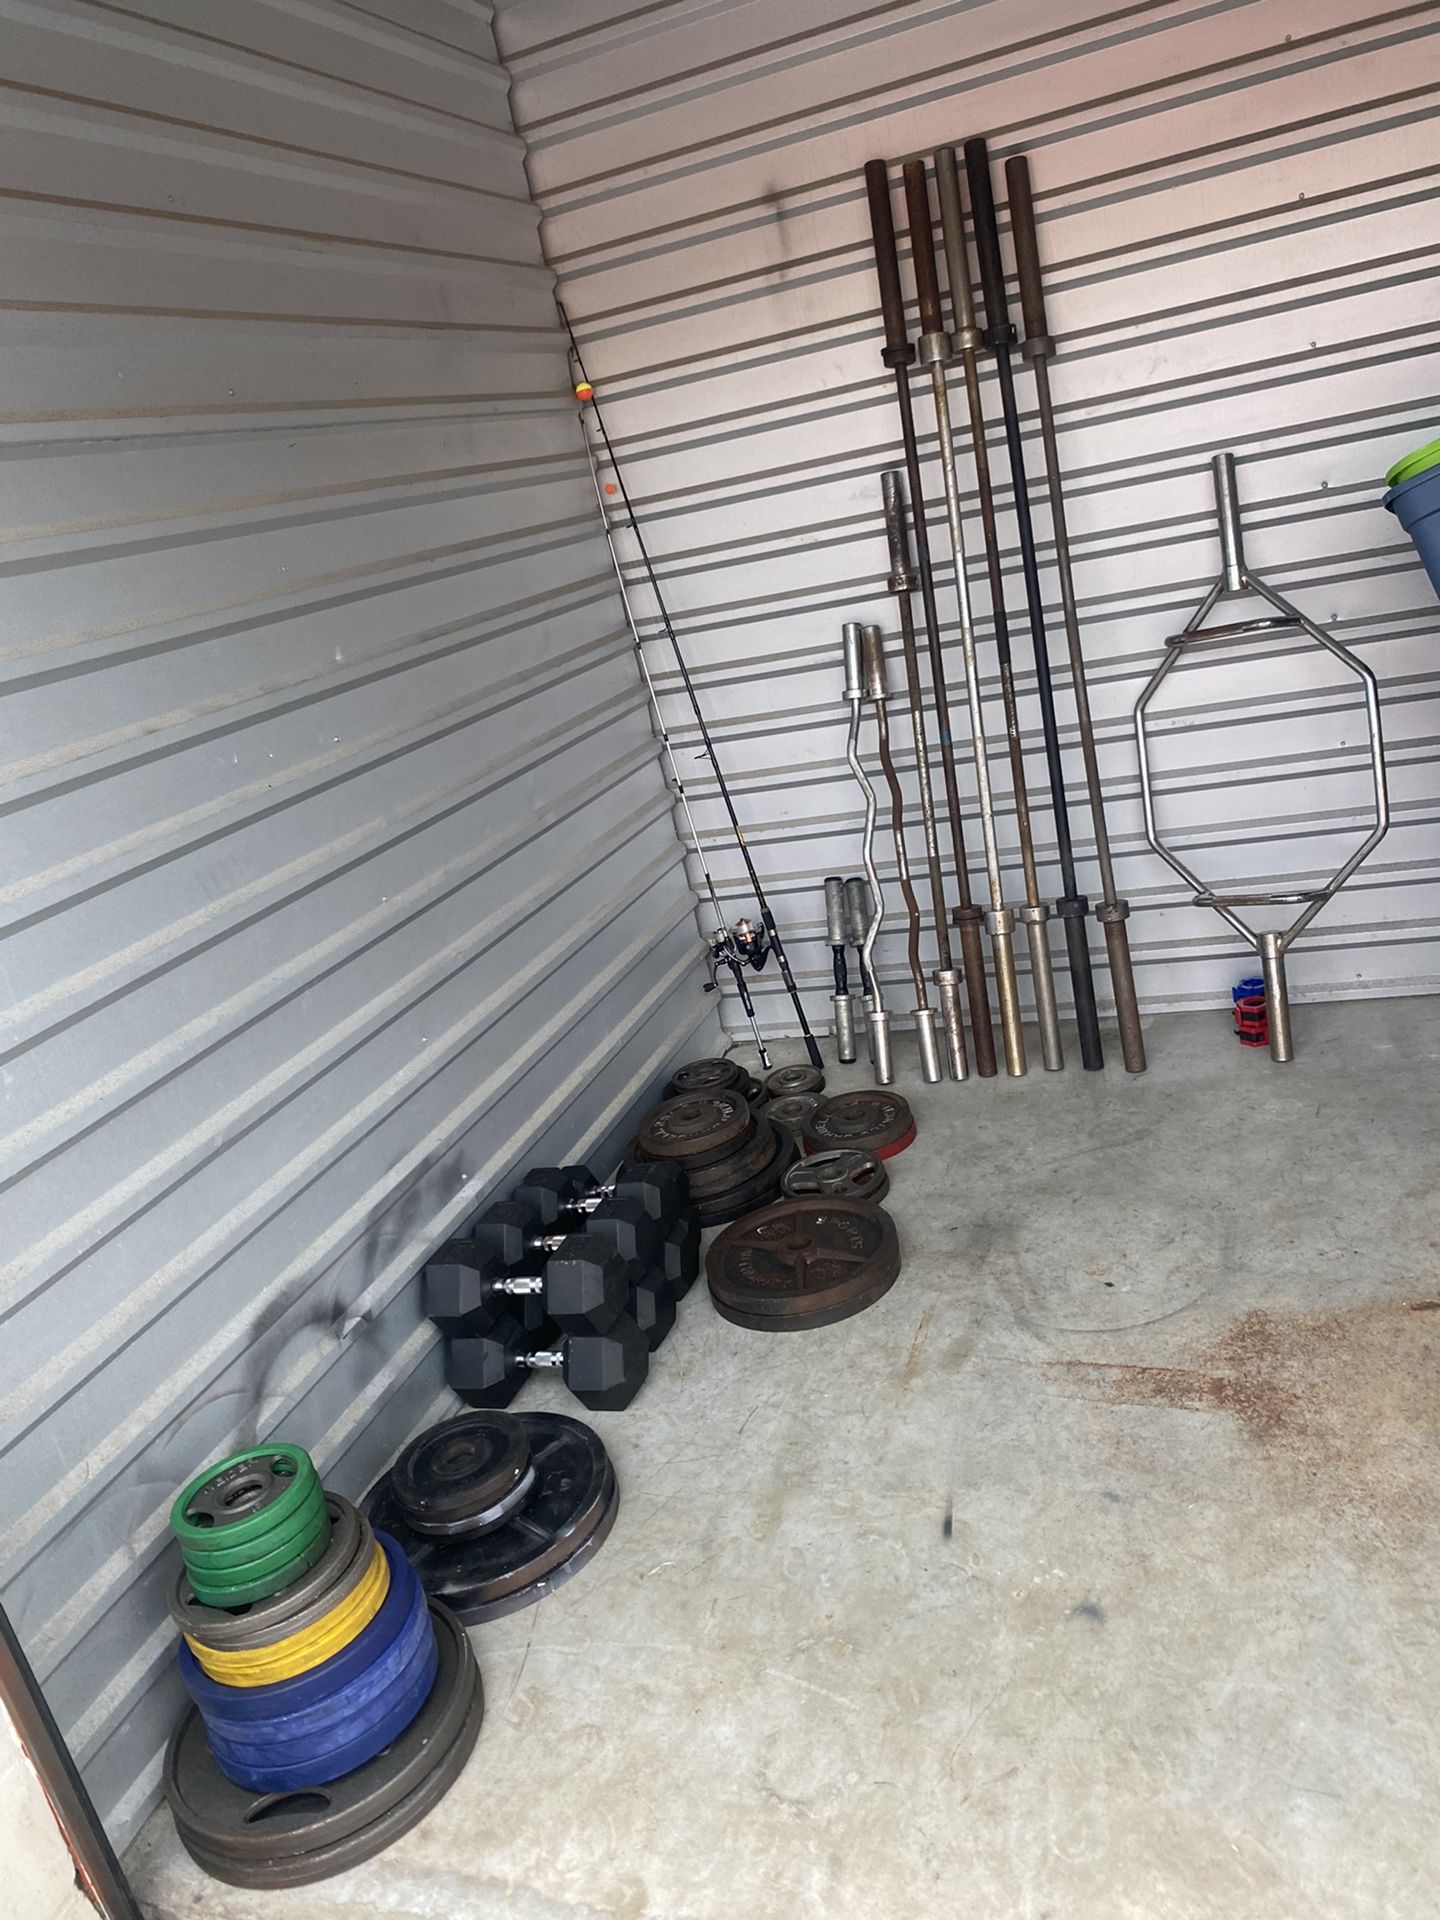 Storage Unit Full Of Gym Equipment And Weights